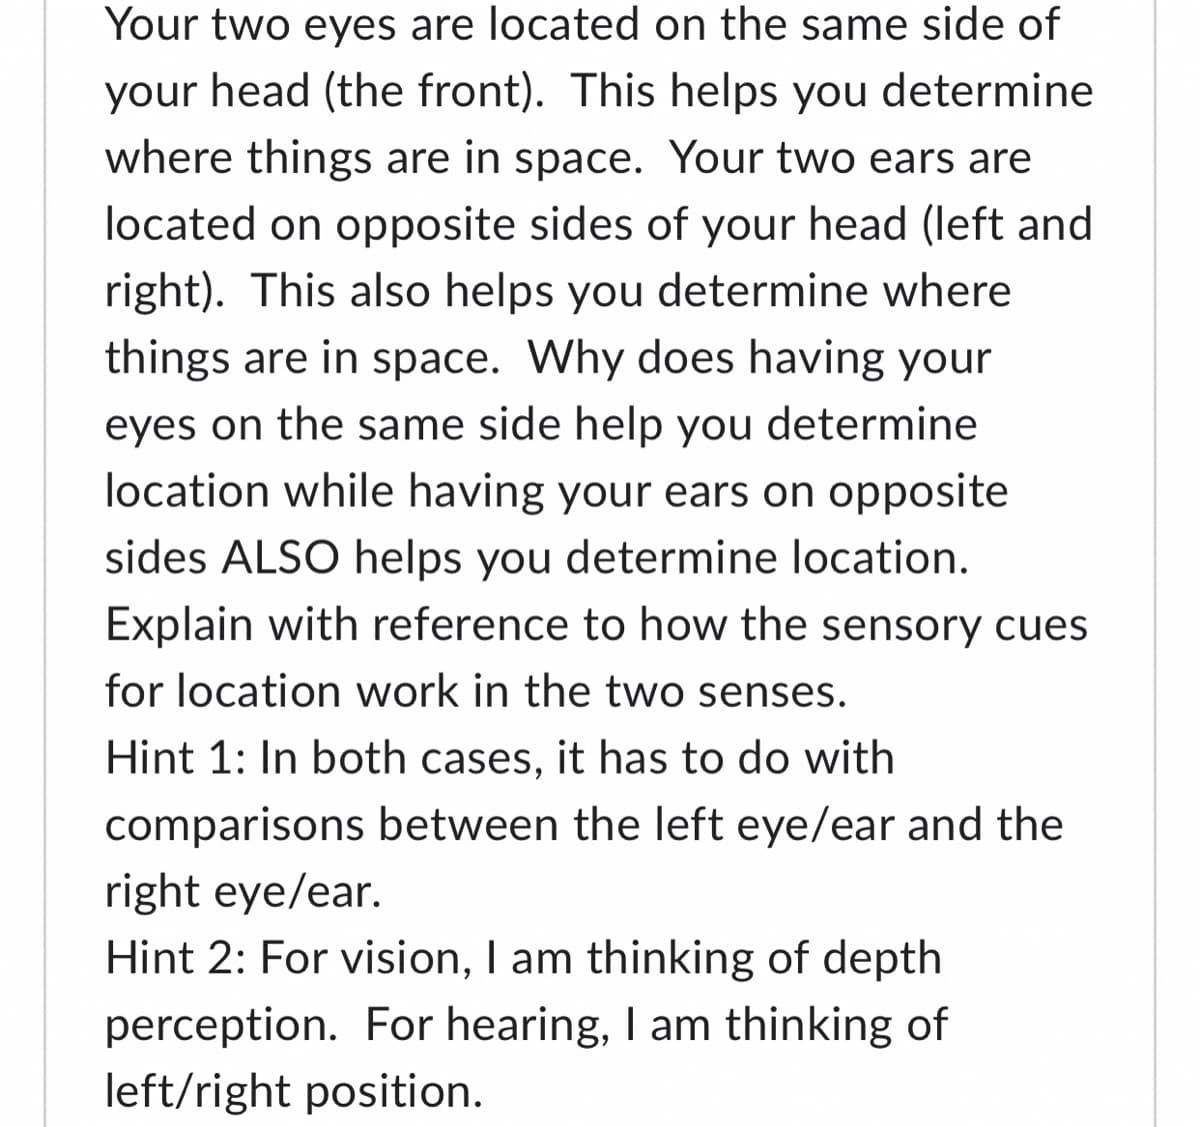 Your two eyes are located on the same side of
your head (the front). This helps you determine
where things are in space. Your two ears are
located on opposite sides of your head (left and
right). This also helps you determine where
things are in space. Why does having your
eyes on the same side help you determine
location while having your ears on opposite
sides ALSO helps you determine location.
Explain with reference to how the sensory cues
for location work in the two senses.
Hint 1: In both cases, it has to do with
comparisons between the left eye/ear and the
right eye/ear.
Hint 2: For vision, I am thinking of depth
perception. For hearing, I am thinking of
left/right position.